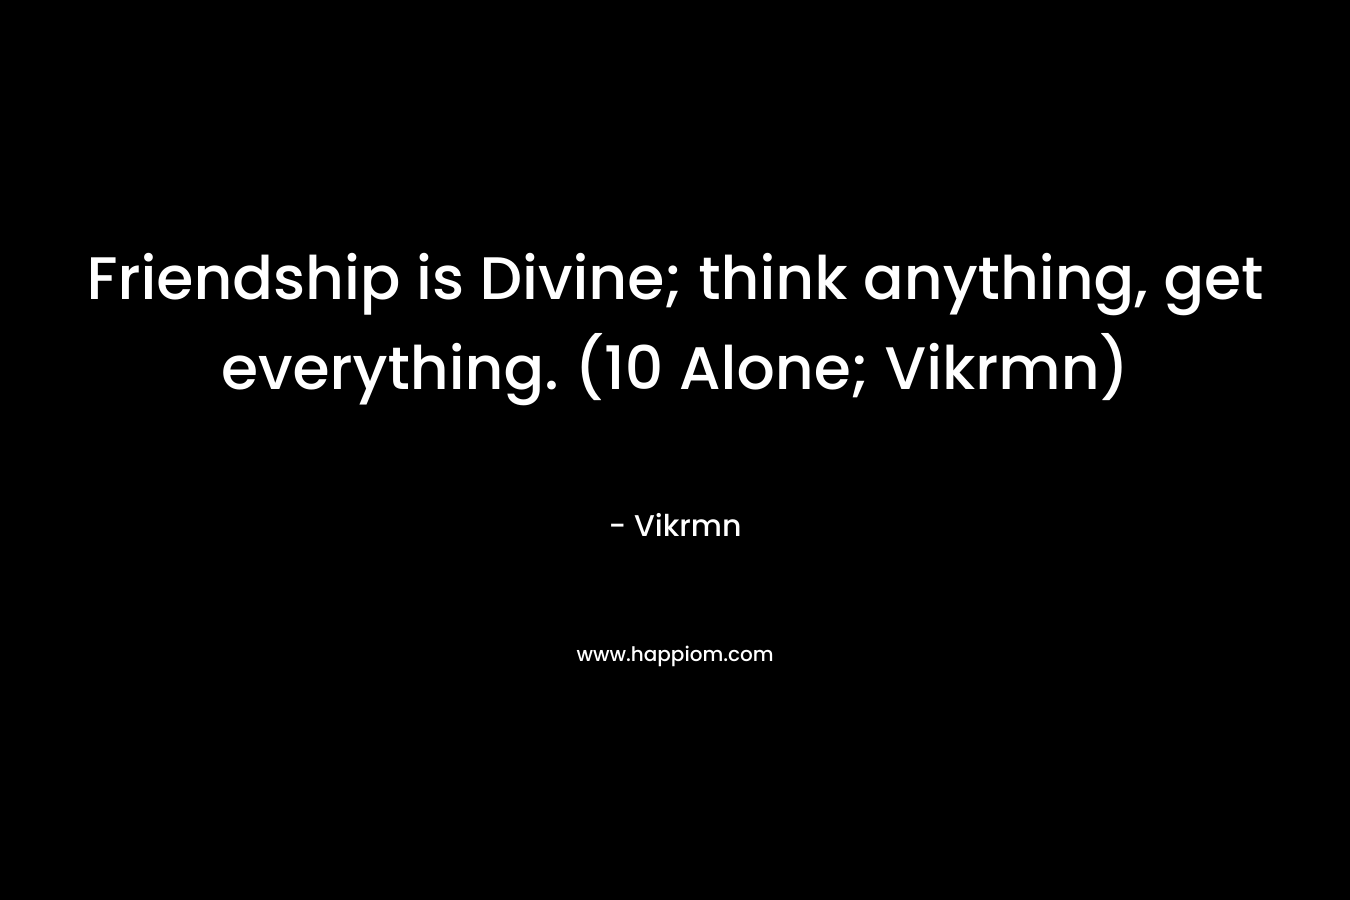 Friendship is Divine; think anything, get everything. (10 Alone; Vikrmn)